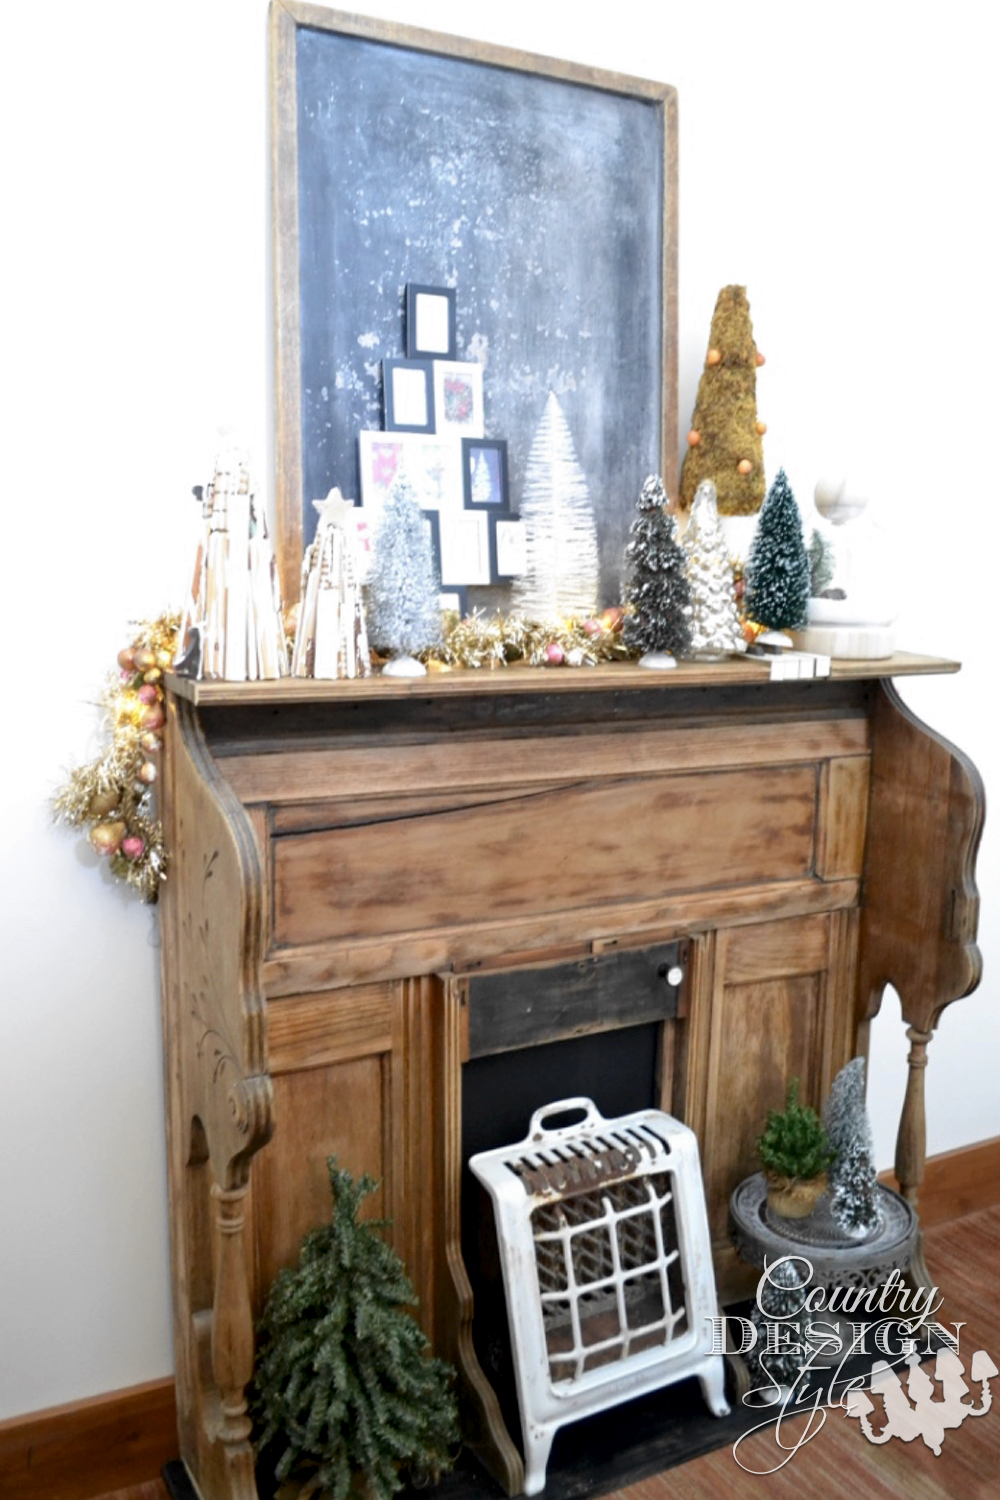 Delightful Unique Fireplace Makeover in One Hour | Country Design Style | countrydesignstyle.com